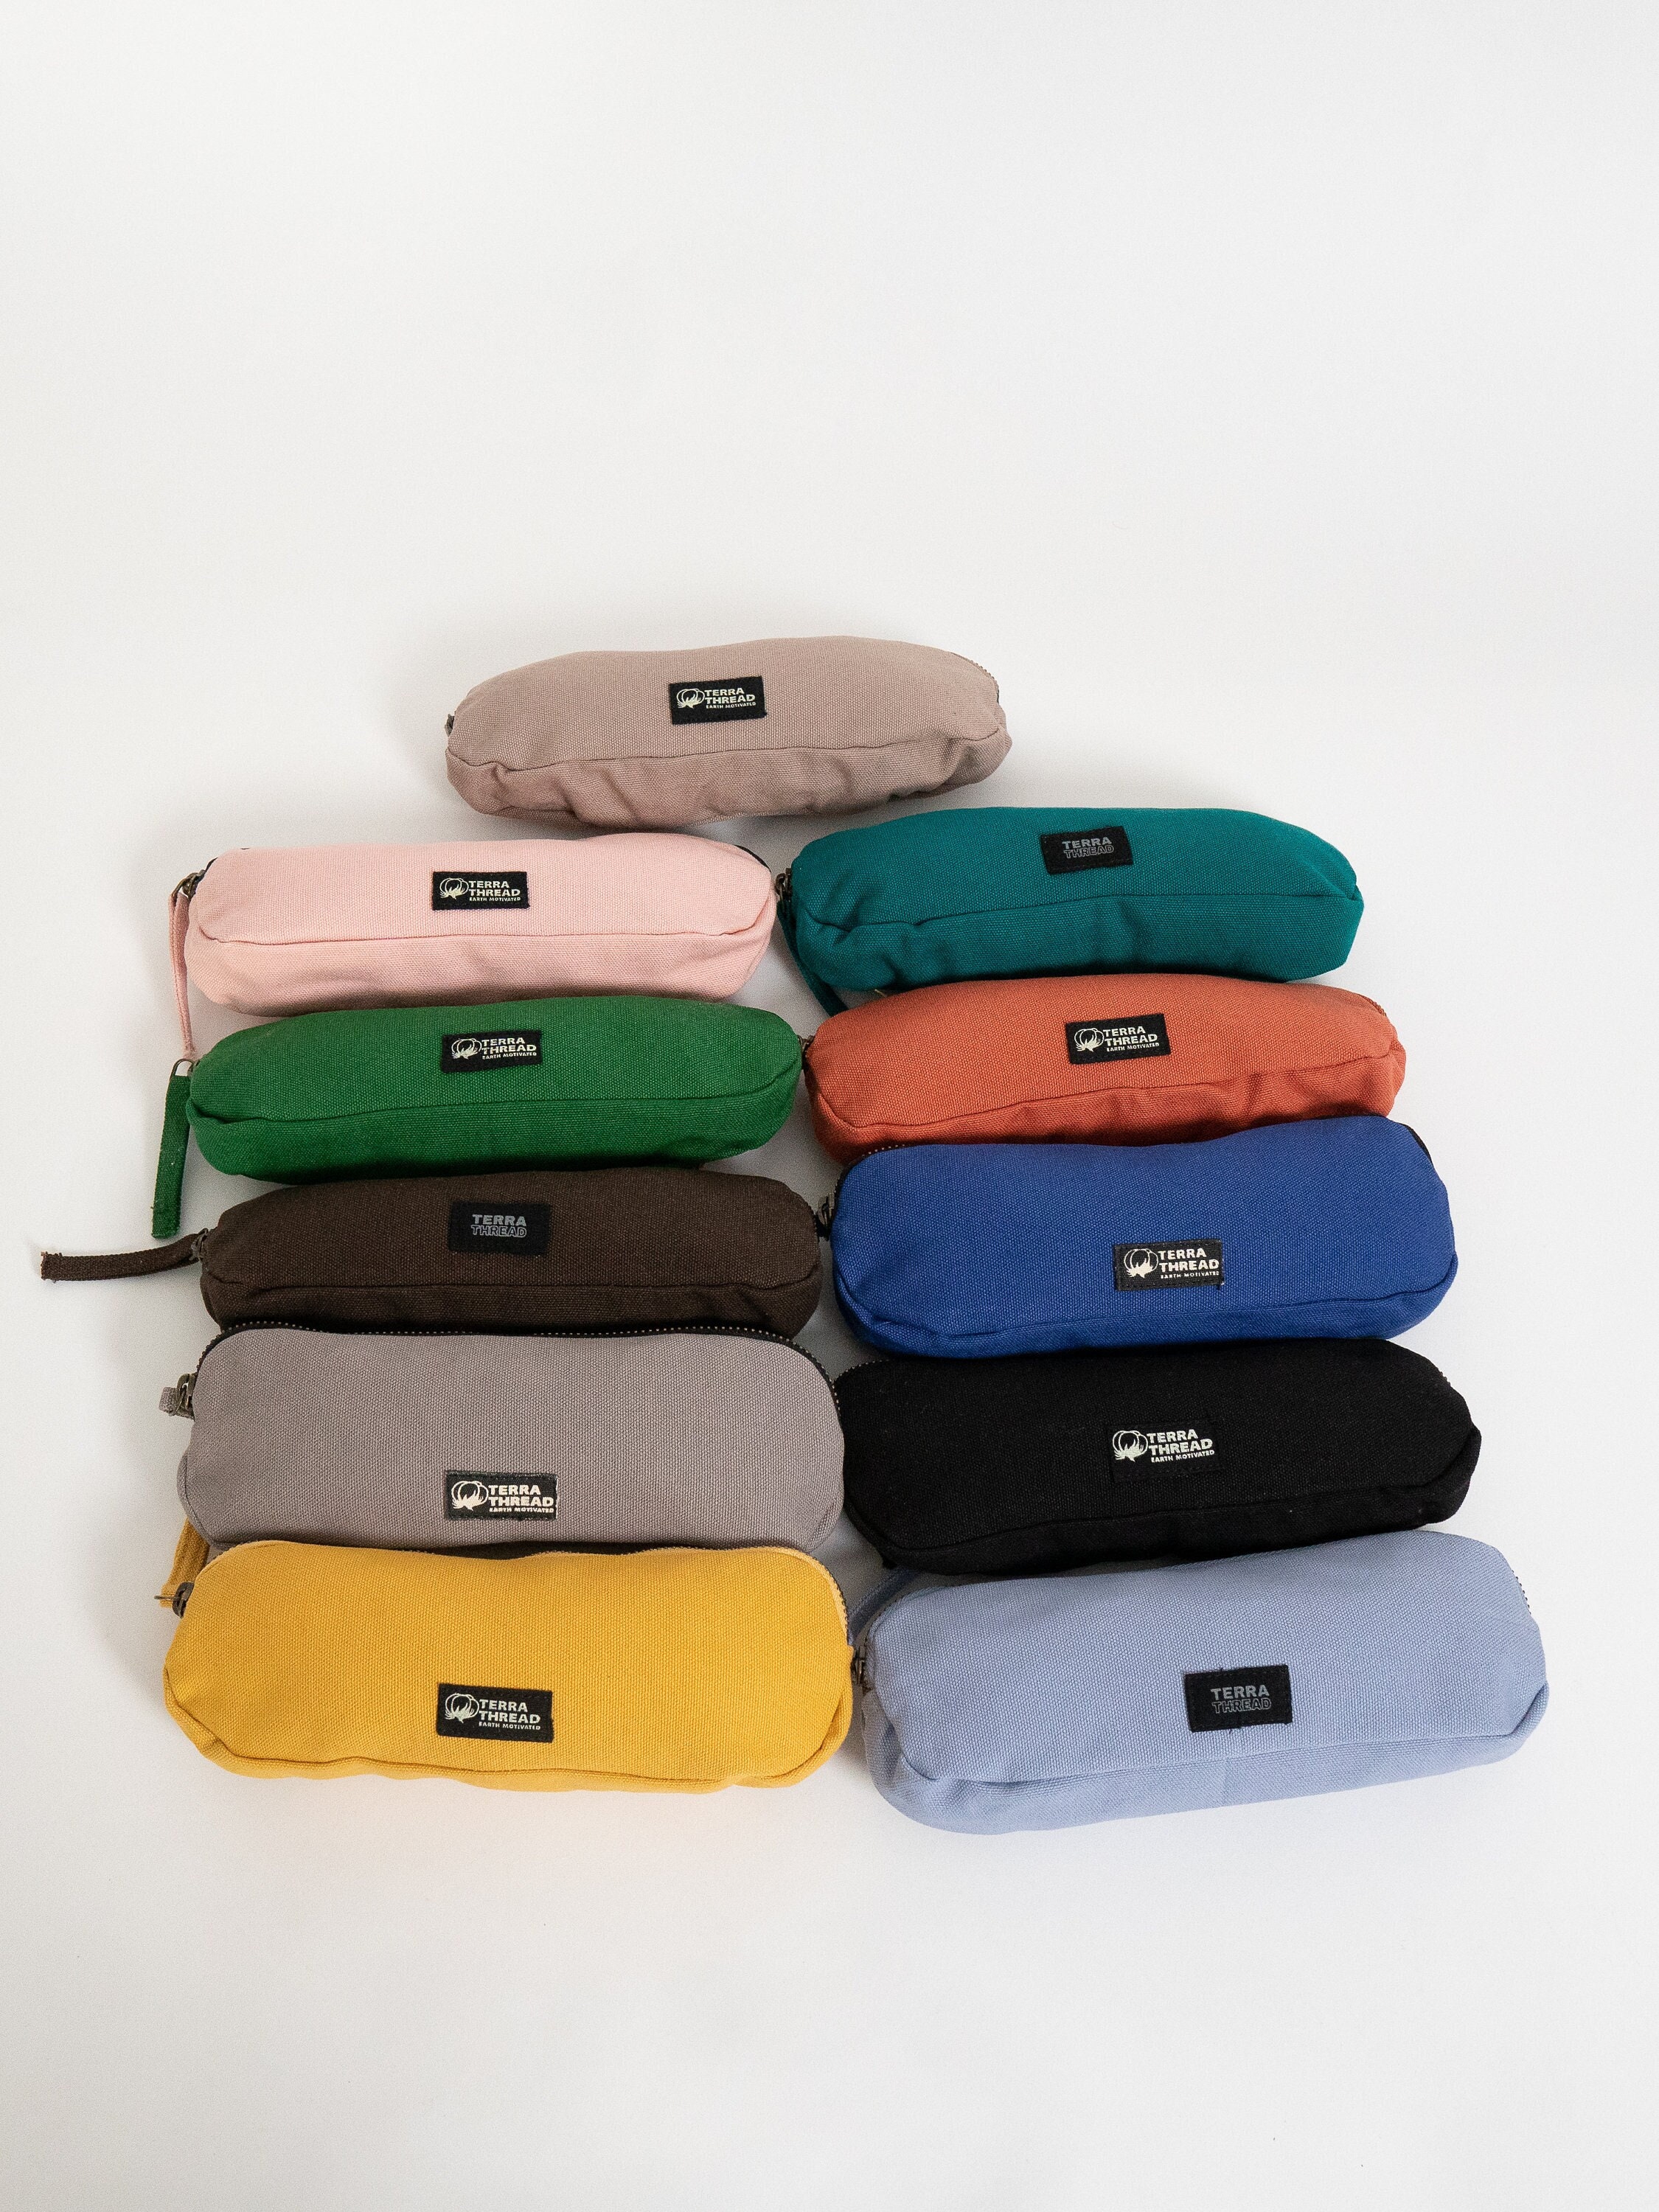 Canvas Pencil Case / Pencil Bag / Pencil Pouch, Rugged and Durable